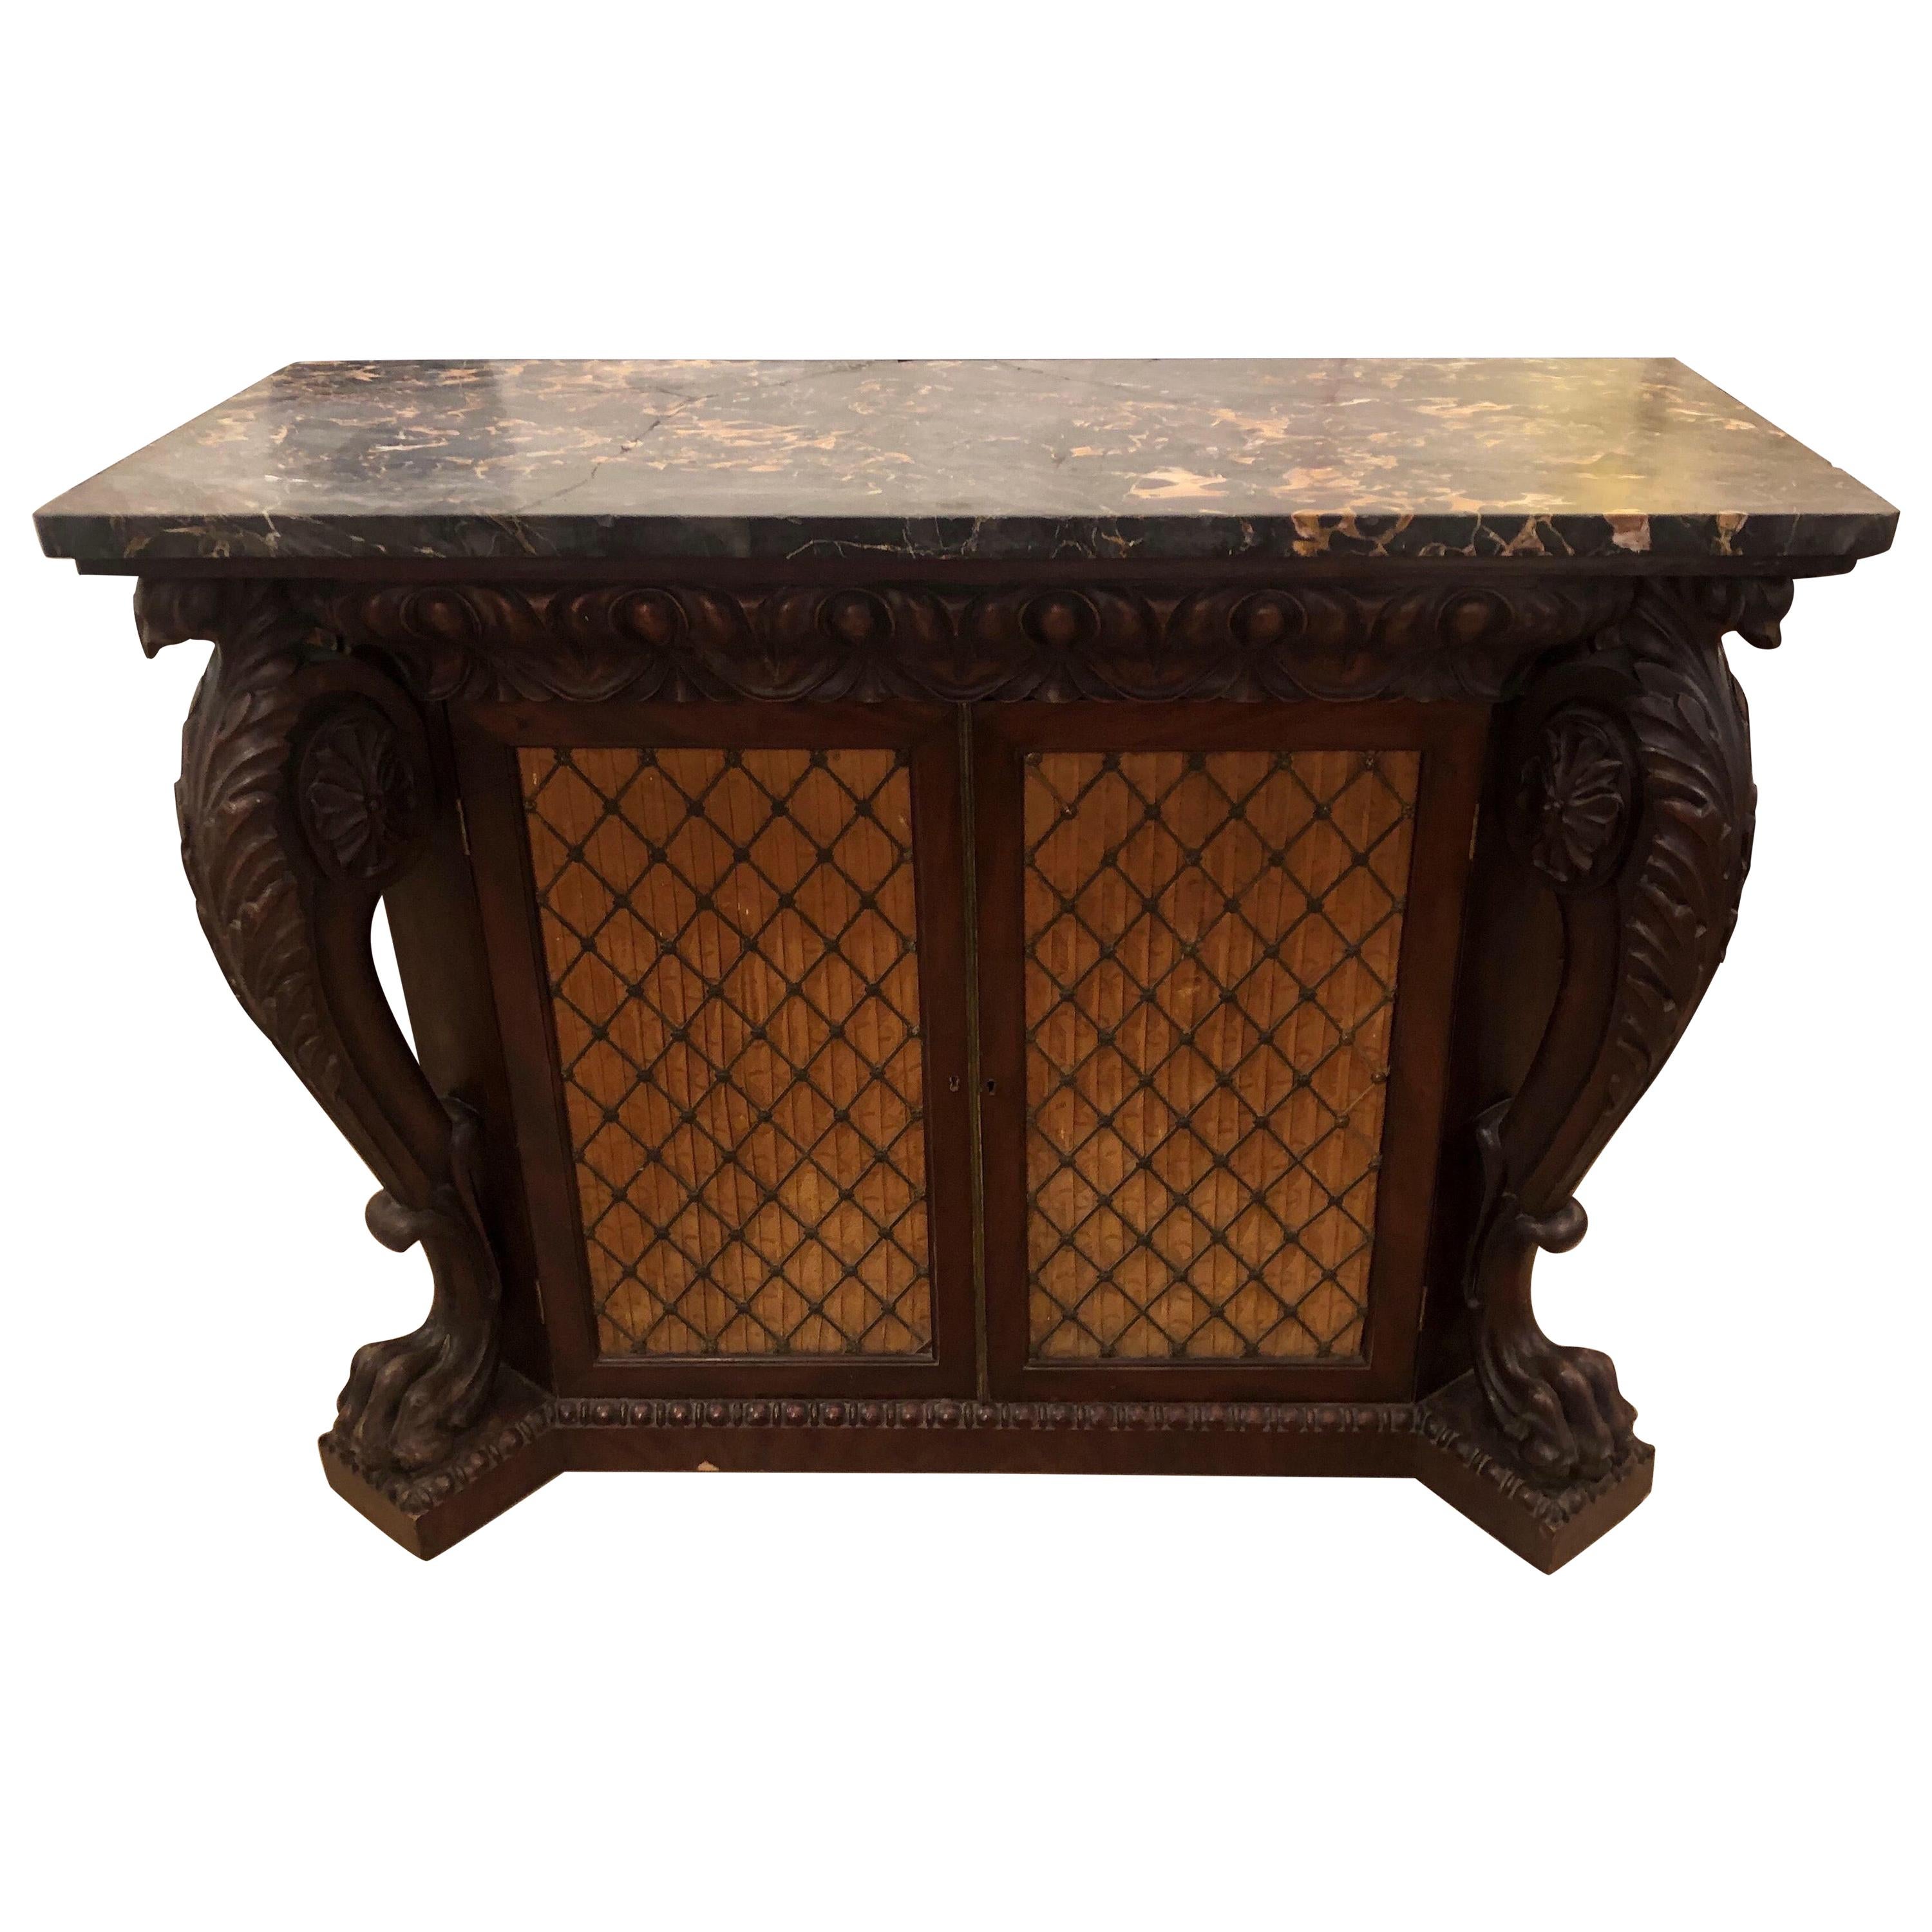 Incredible 19th Century English Regency Marble top Console